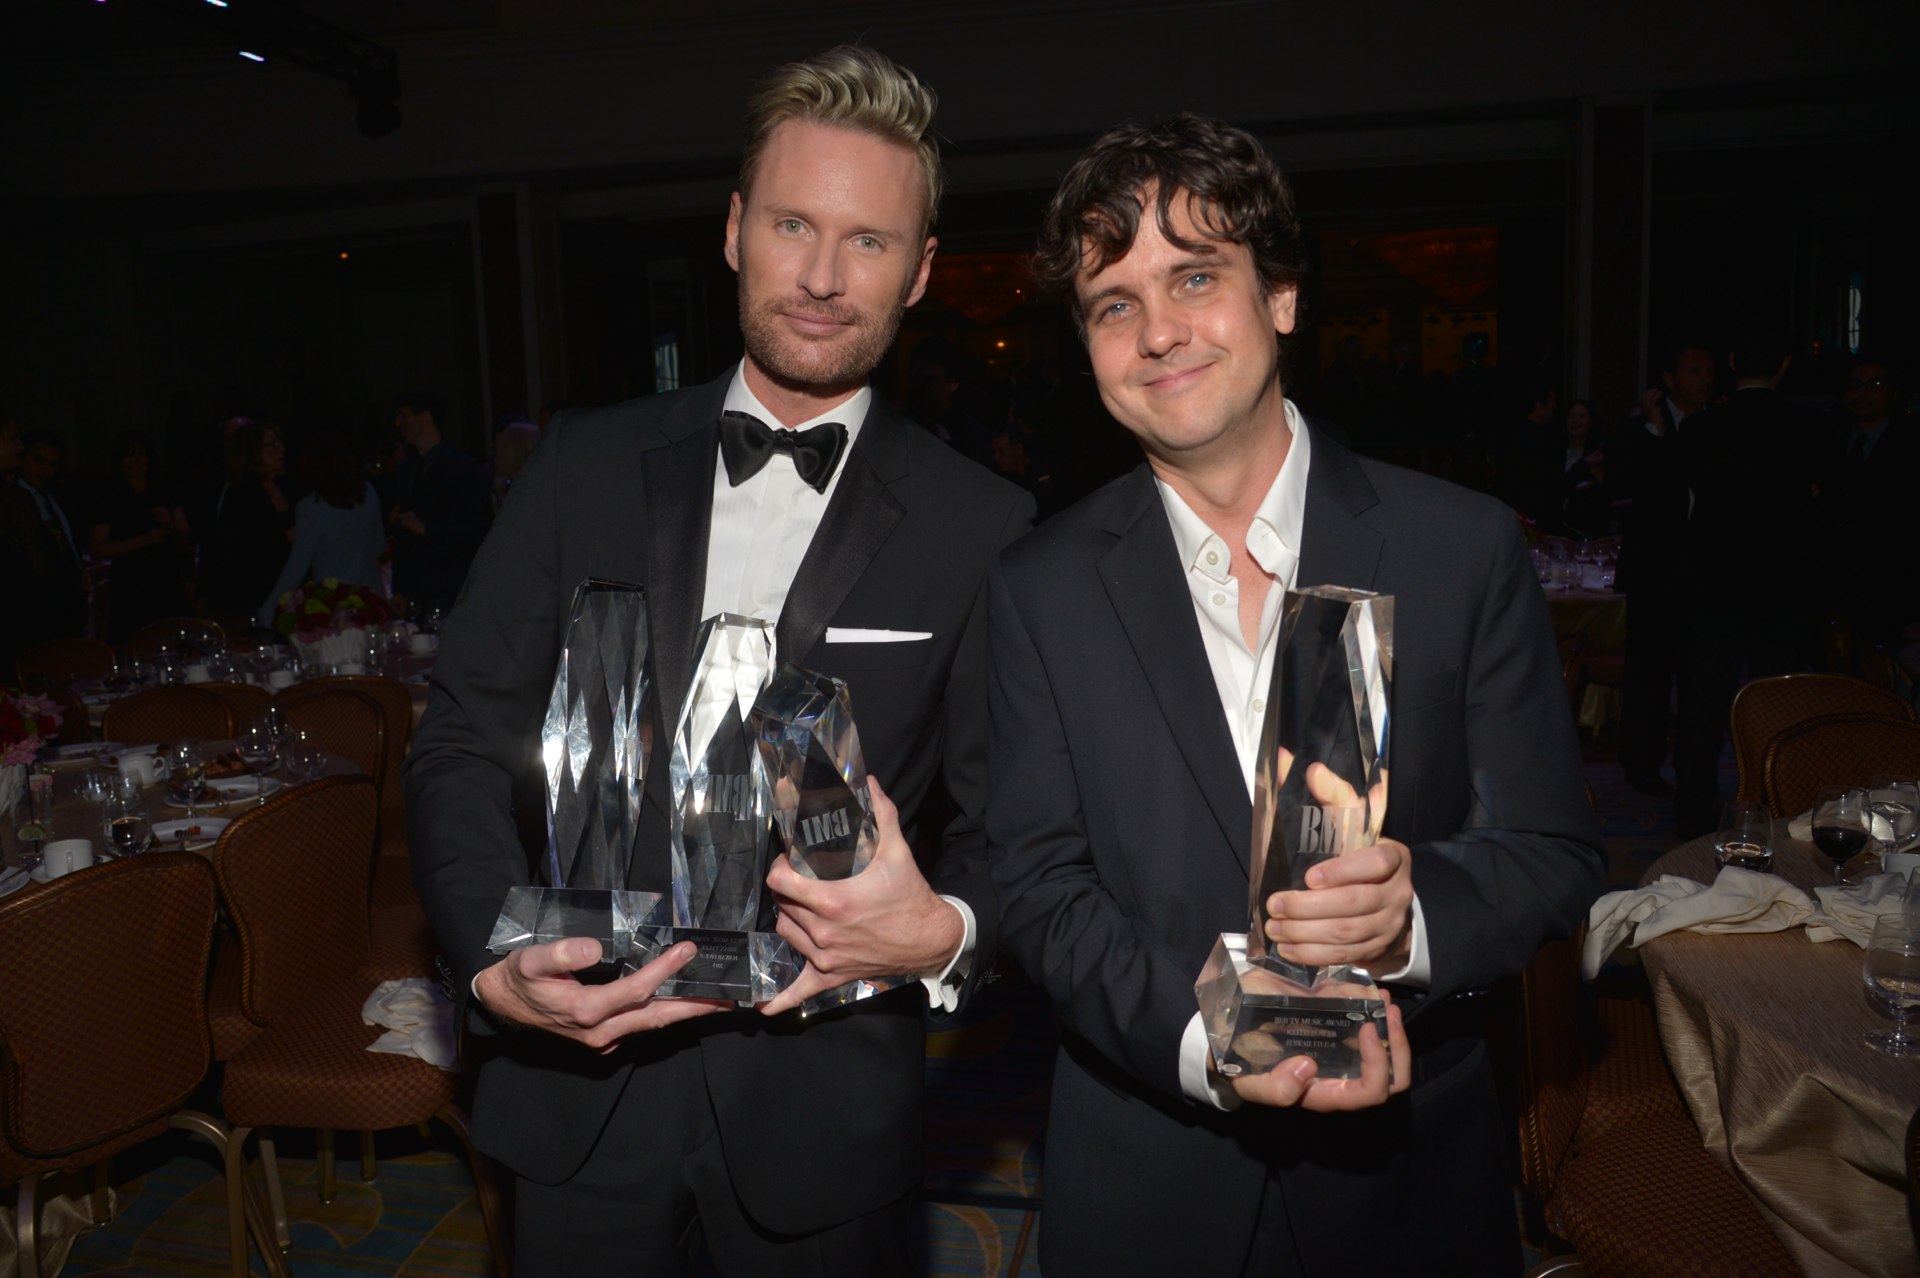 Brian Tyler and Keith Power at the 2013 BMI Awards.